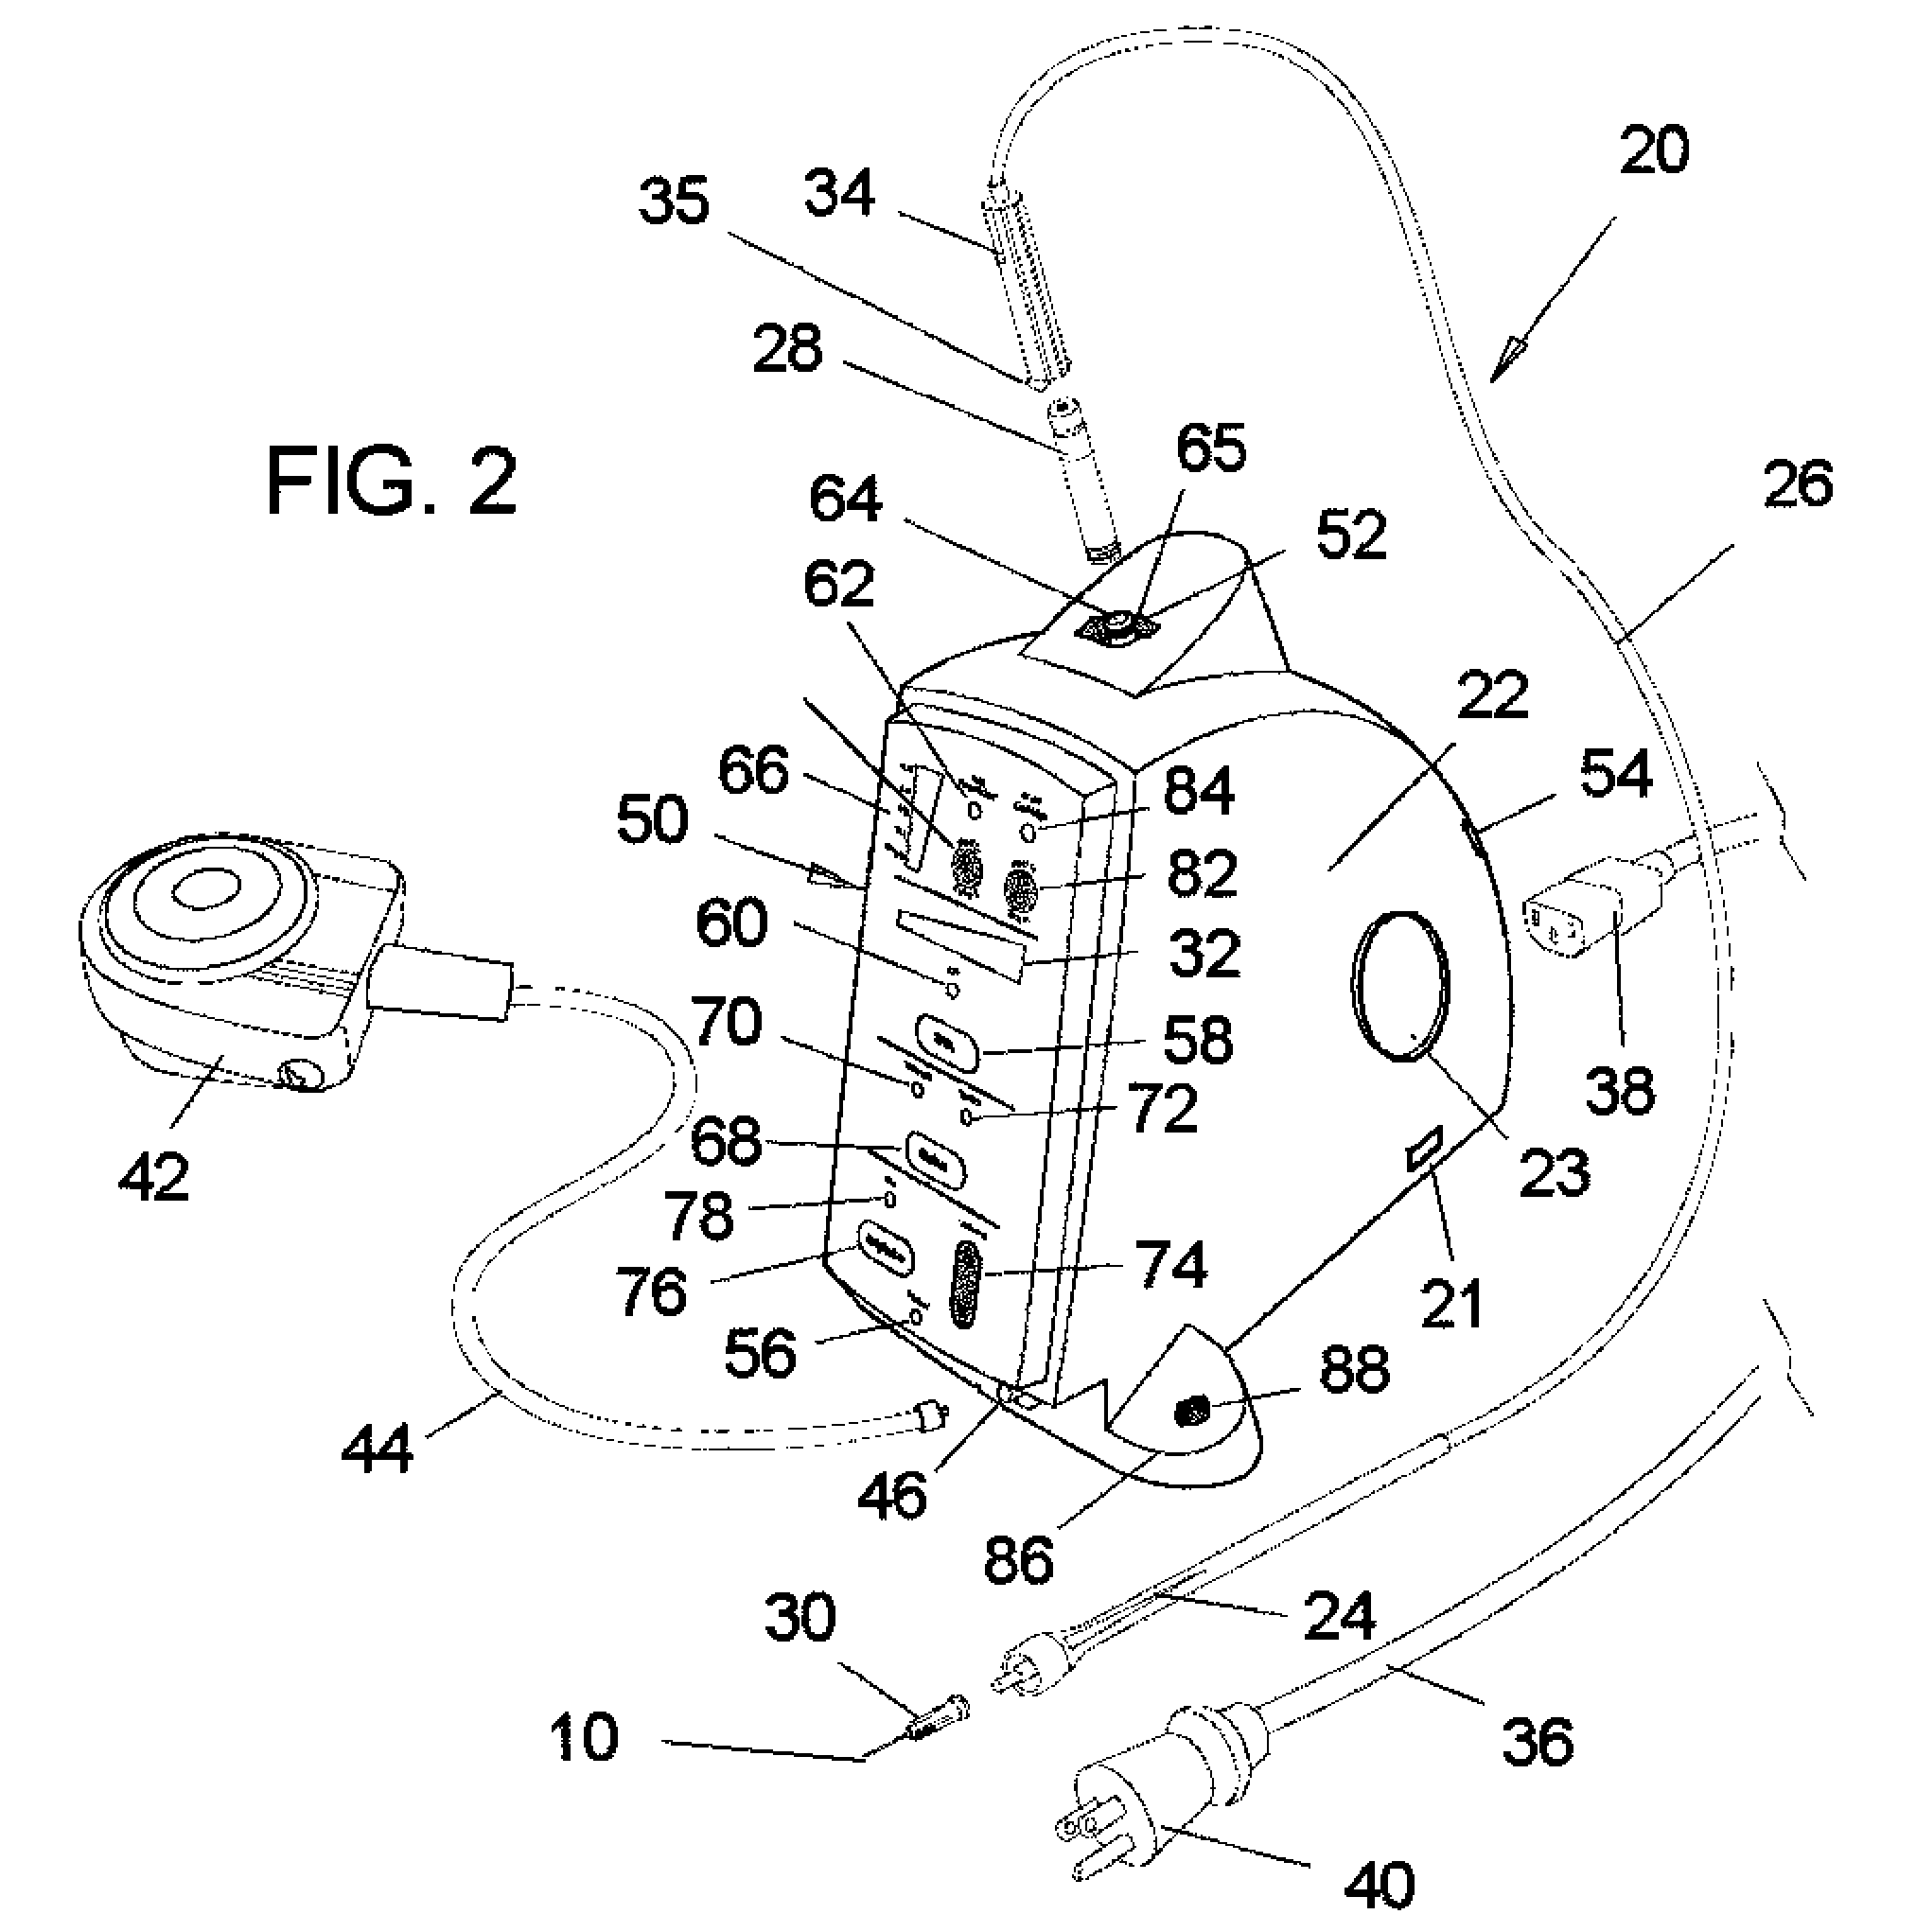 Computer controlled drug delivery system with dynamic pressure sensing